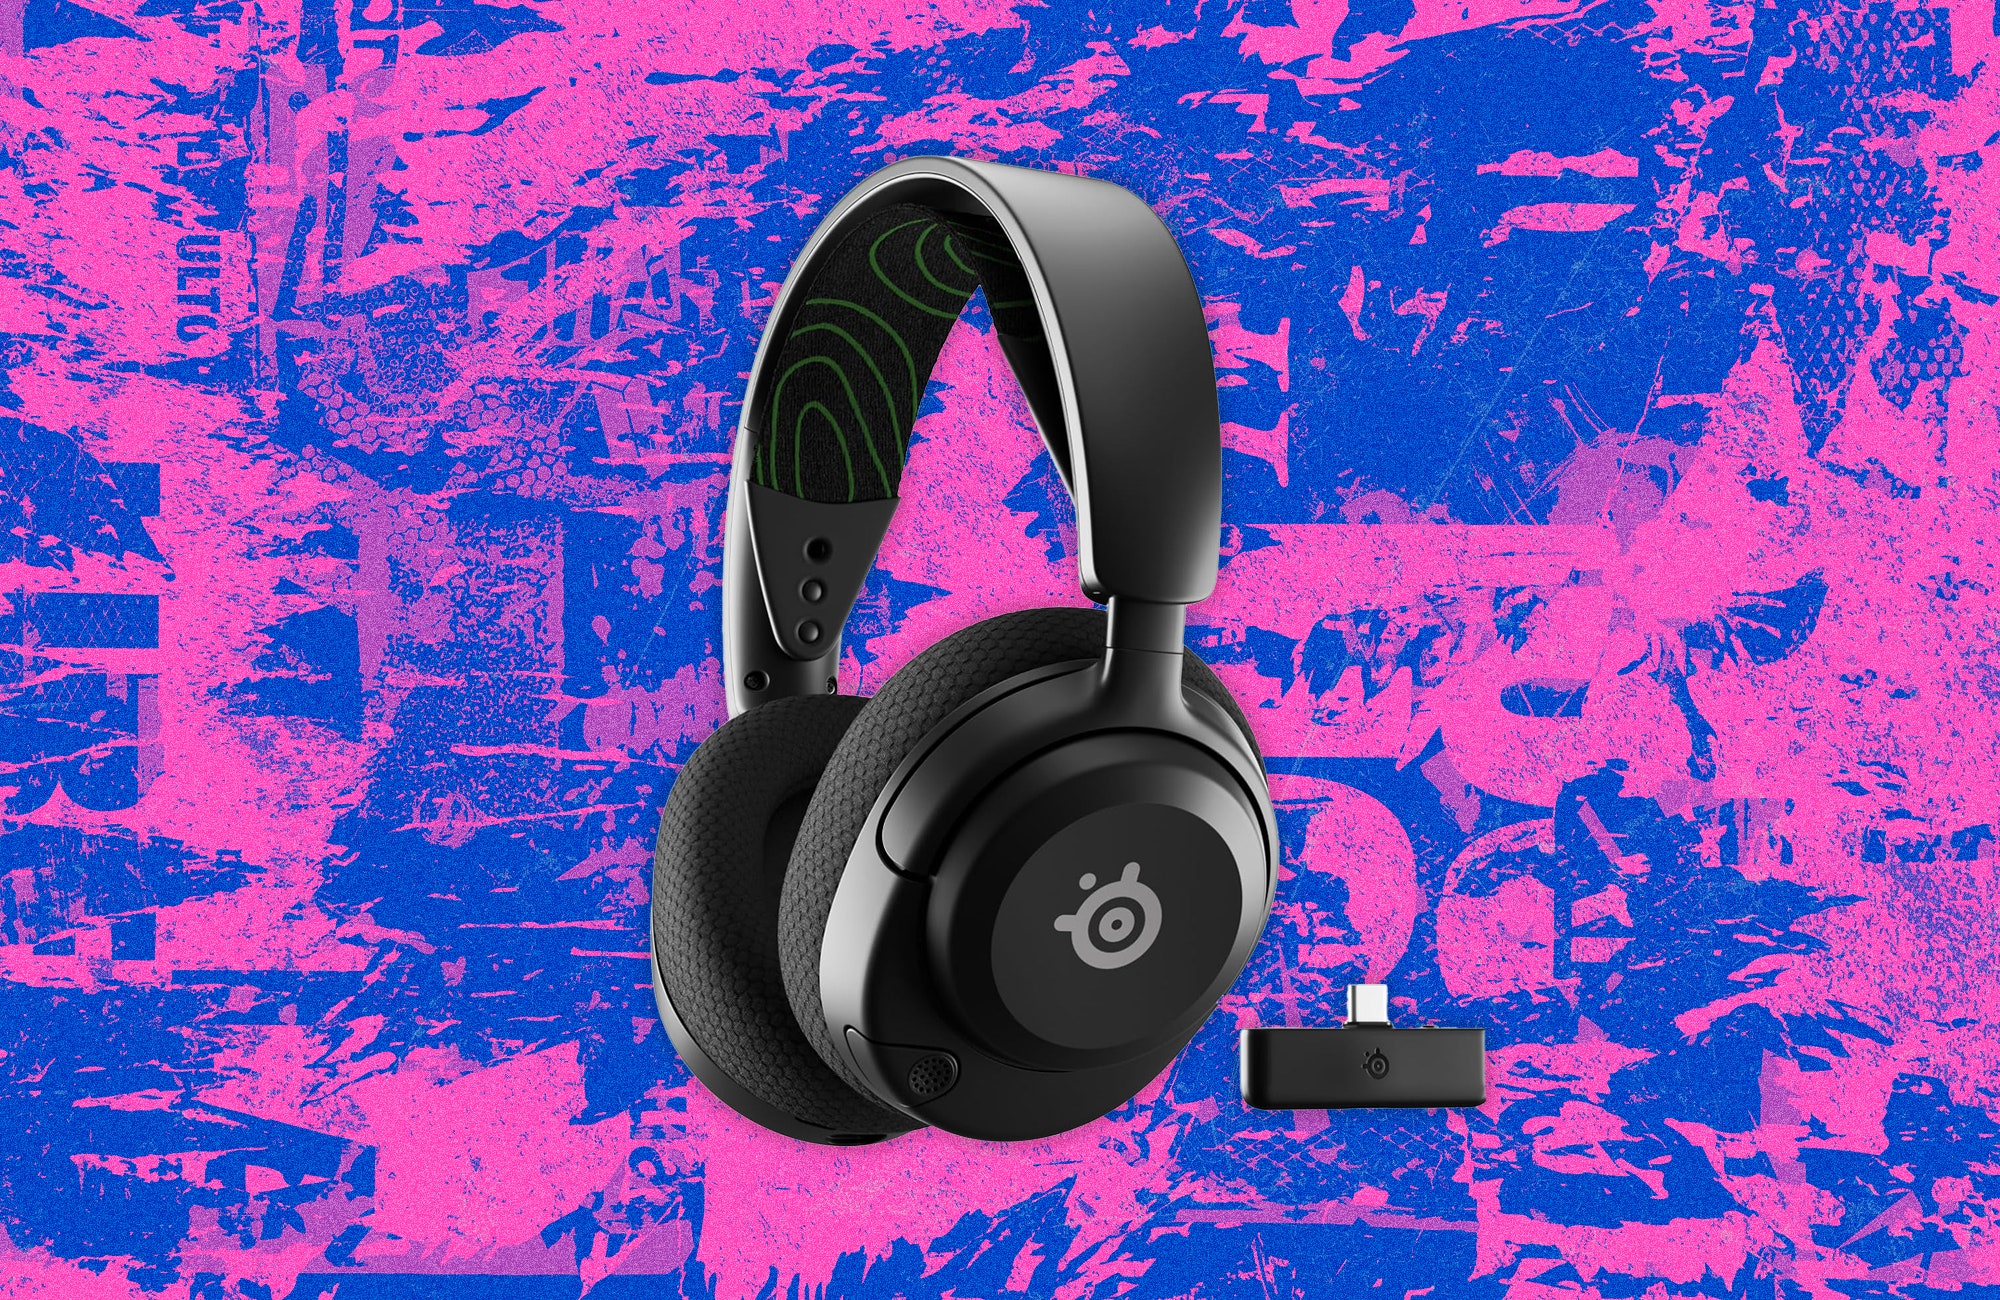 Black overthehead headphones with padded band and cushioned ear cups. Background pink and blue grunge texture.